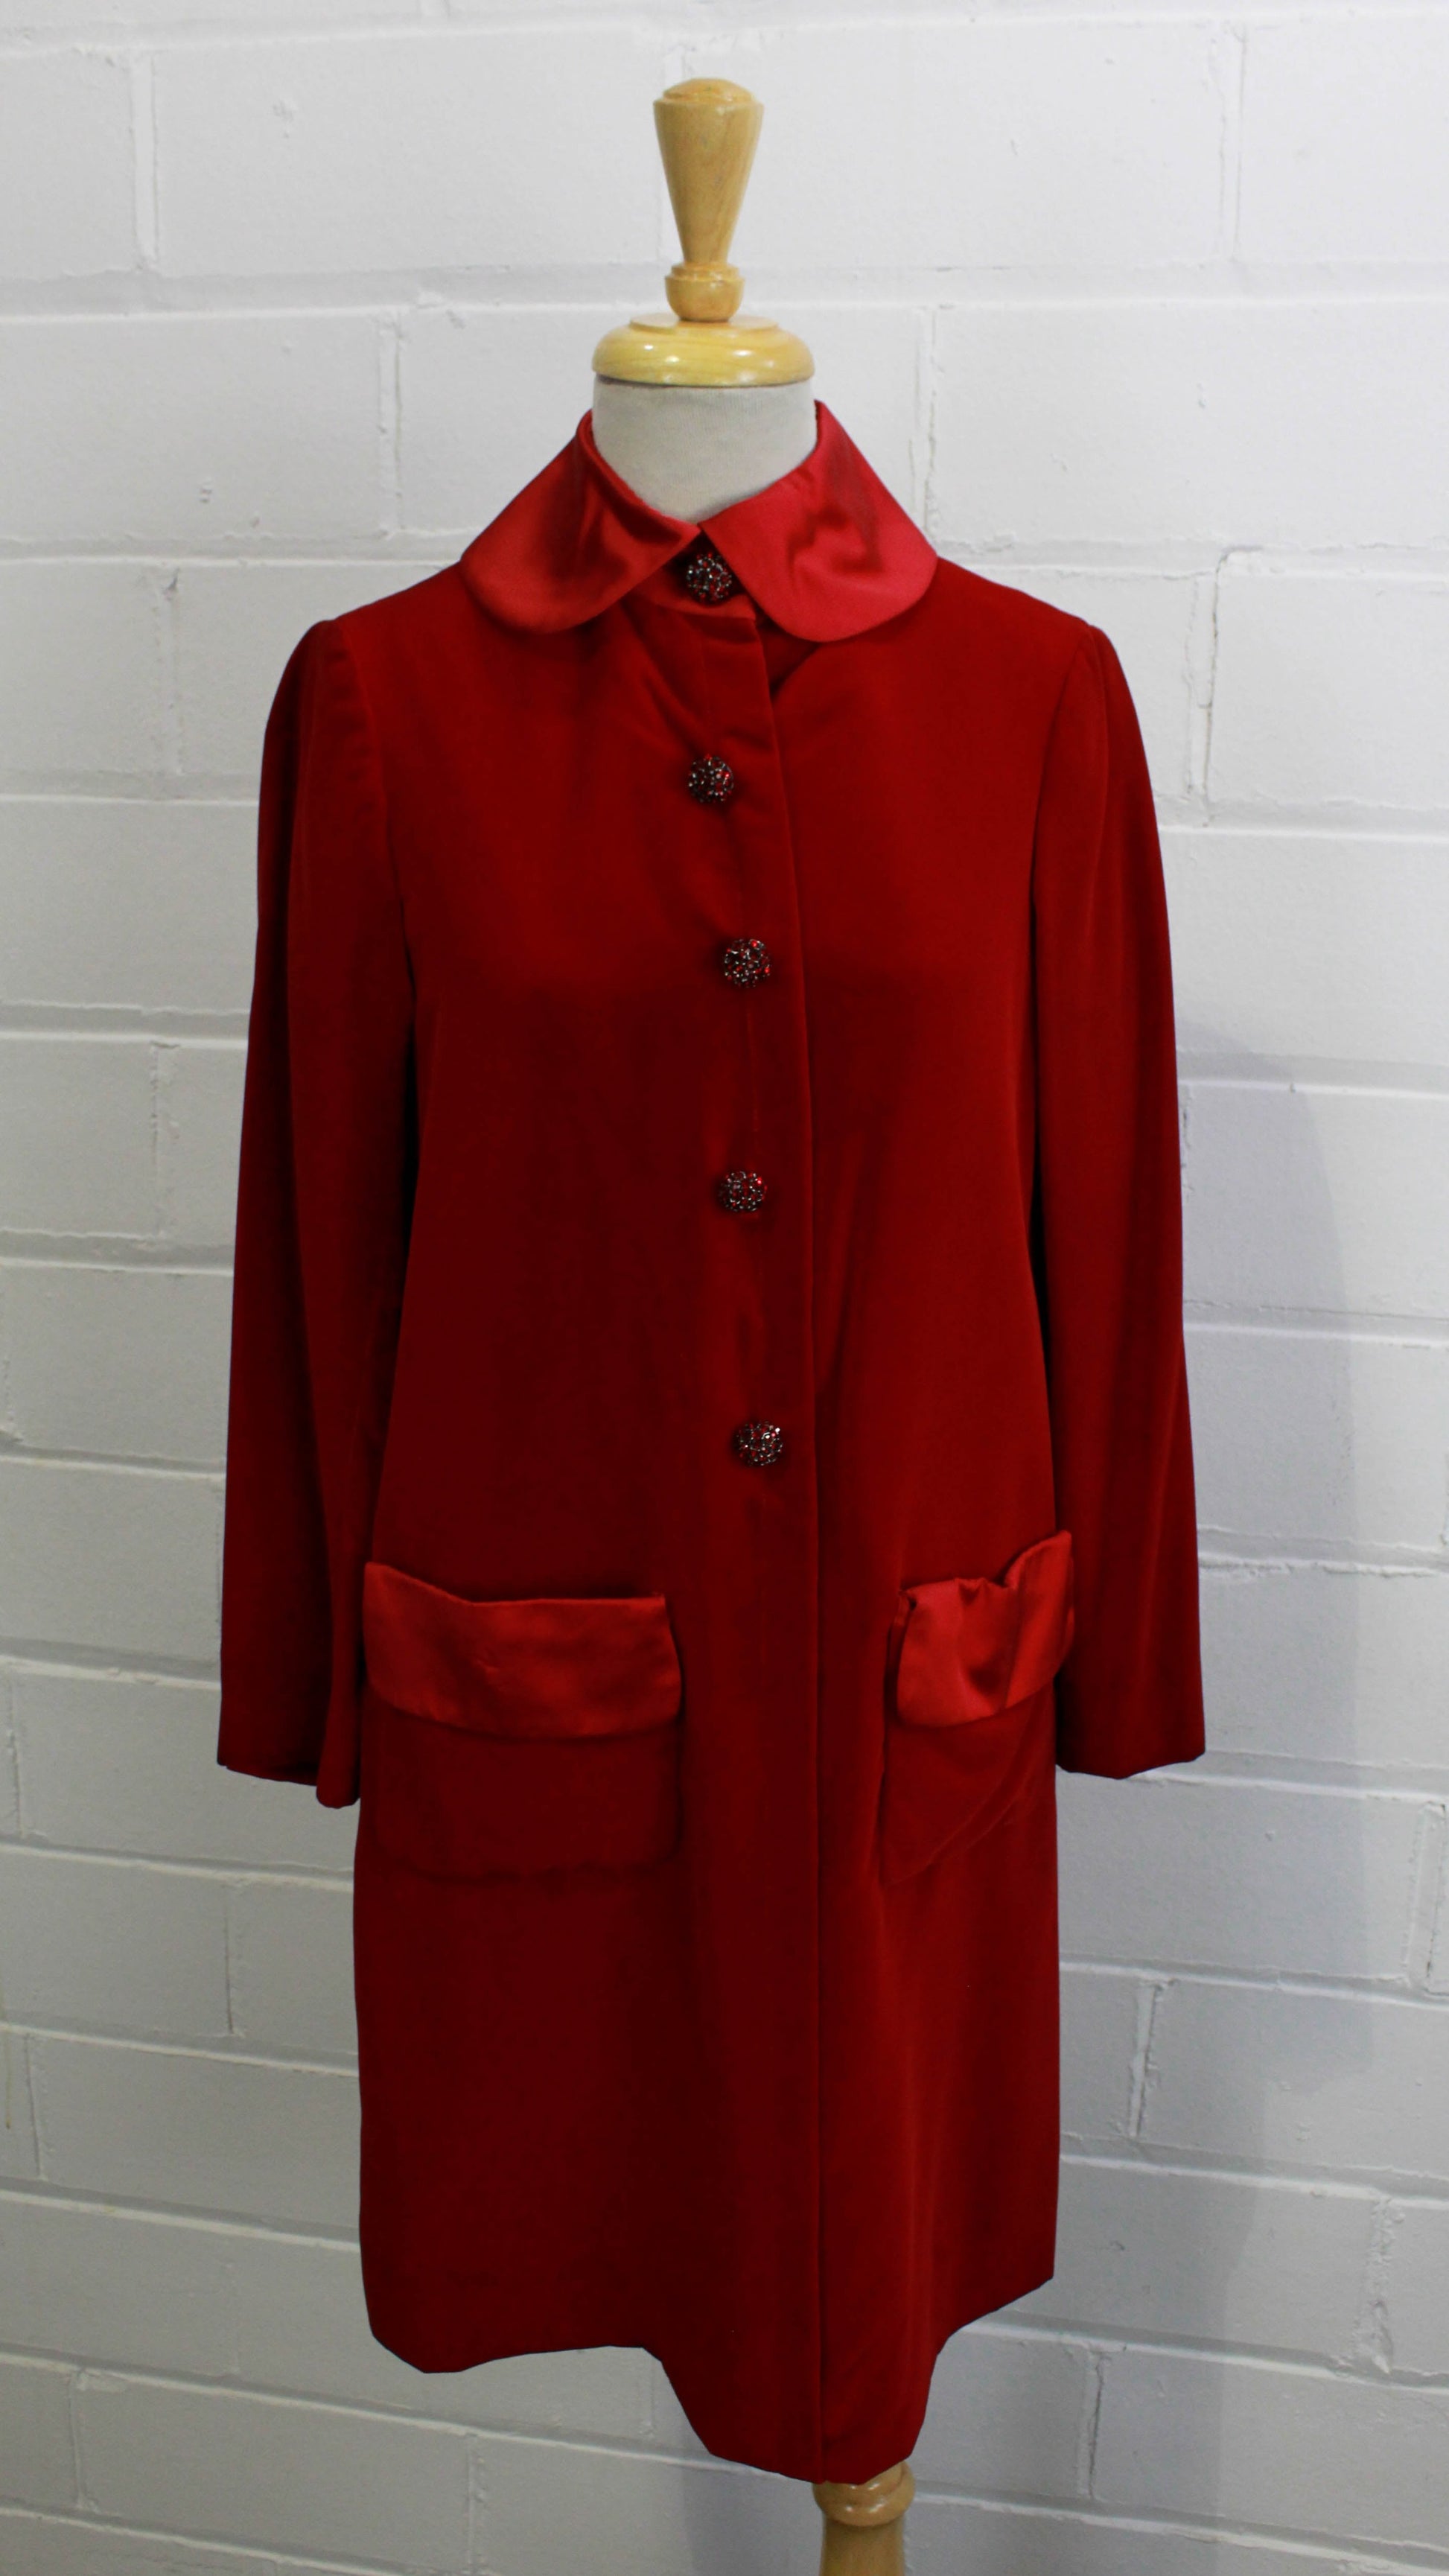 1960s peter pan collar red velvet dress with pockets front view